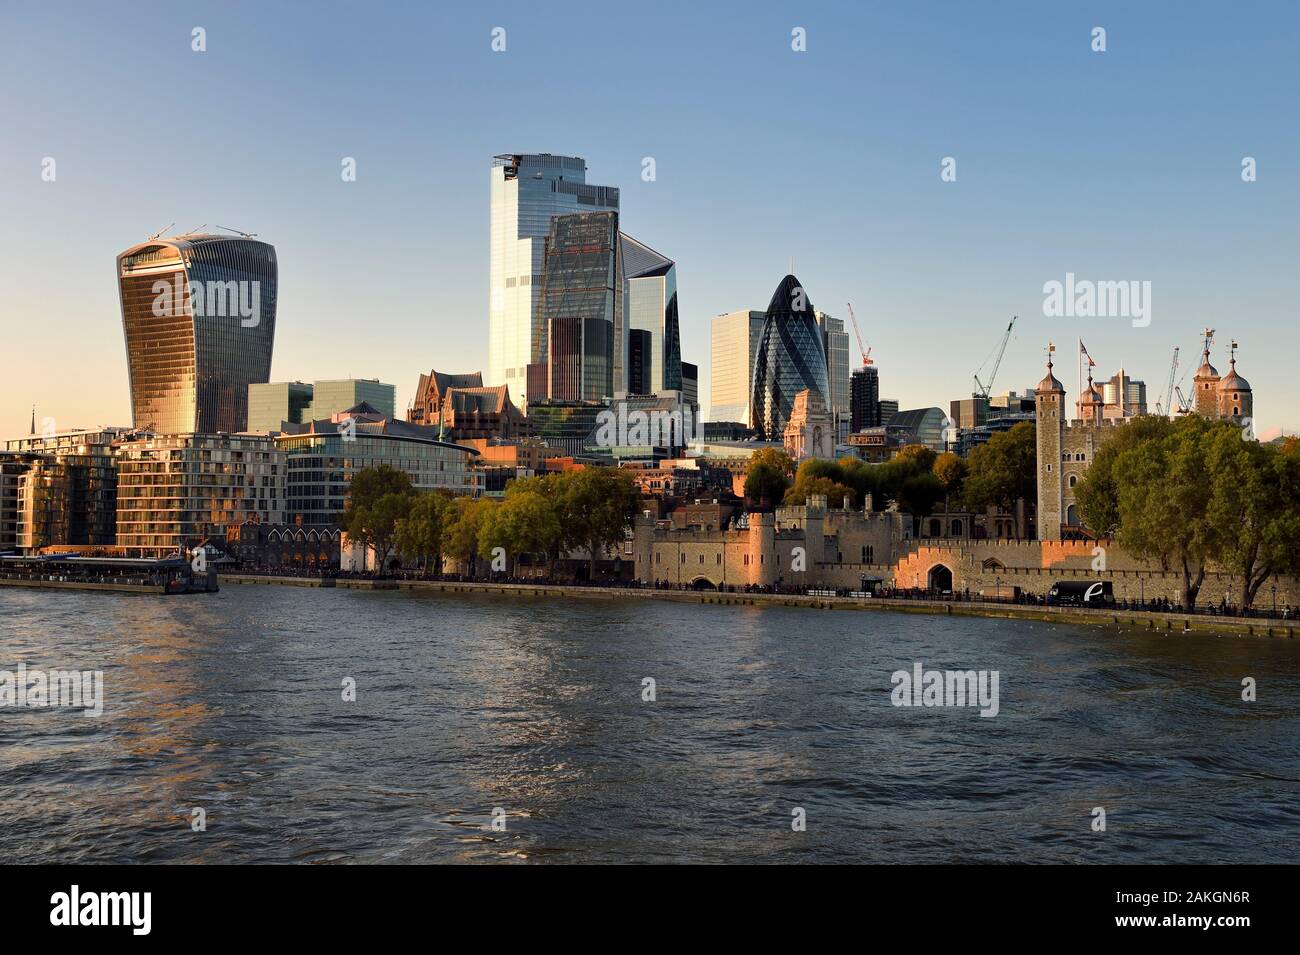 United Kingdom, London, the River Thames, the Tower of London, the City with its skyscrapers, the tower known as the Walkie Talkie designed by architect Rafael Viñoly, Tower 30 St Mary Axe or Swiss Re Building also known as the gherkin designed by architect Norman Foster Stock Photo